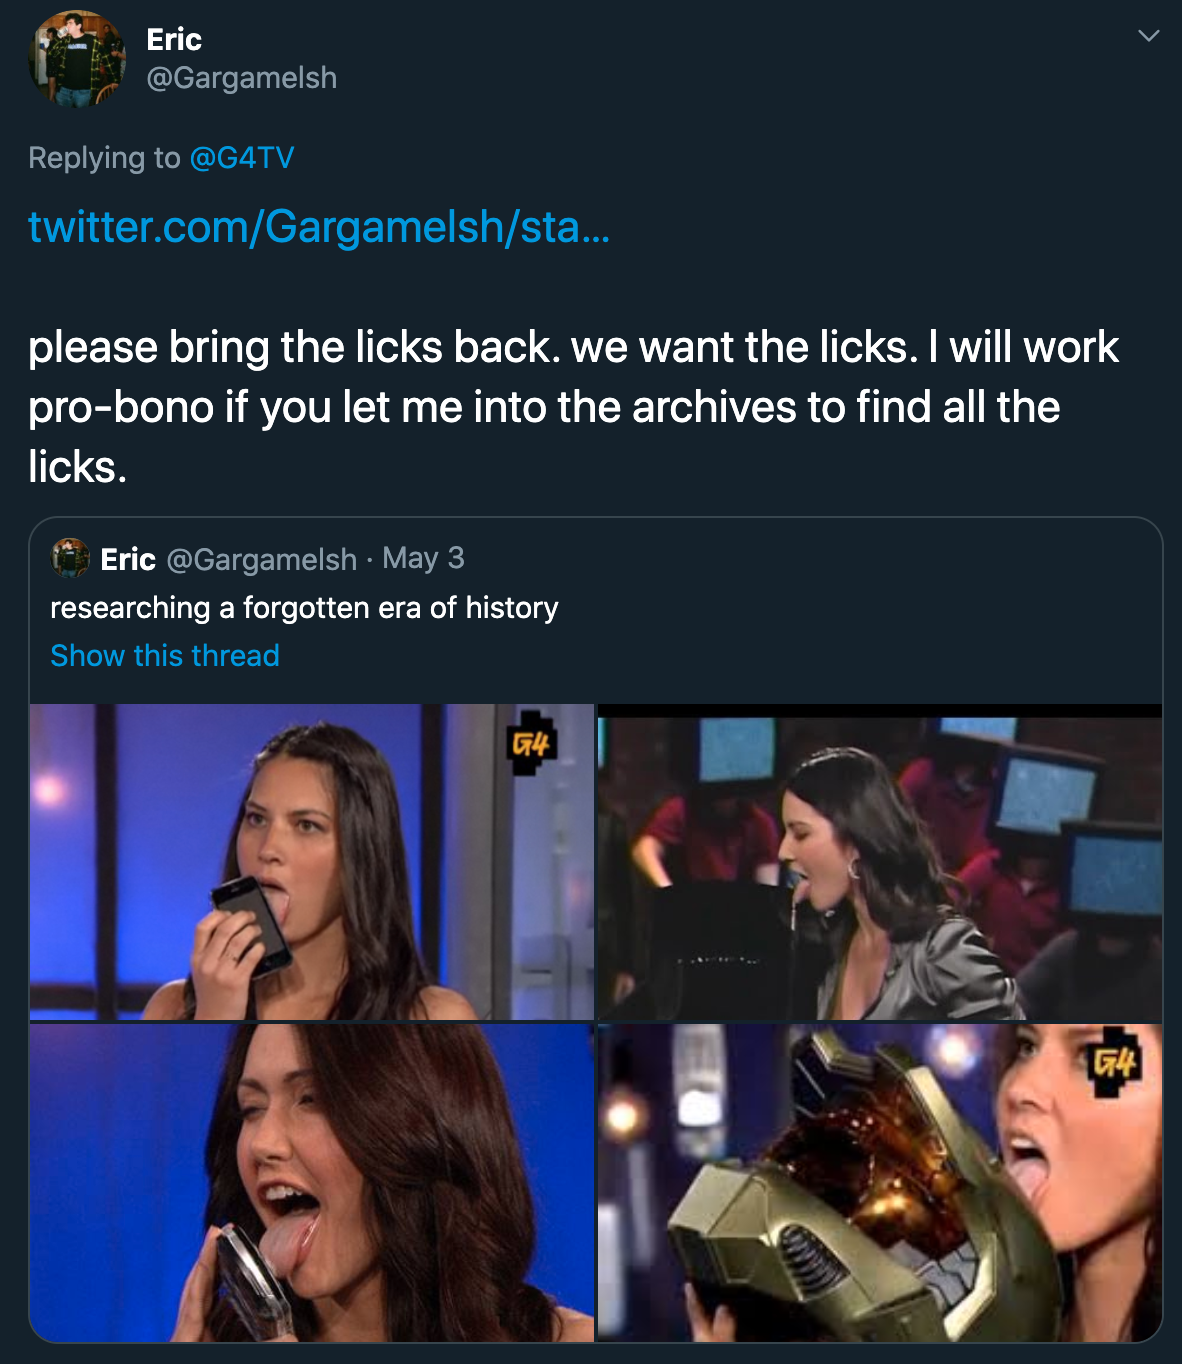 please bring the licks back. we want the licks. I will work probono if you let me into the archives to find all the licks.